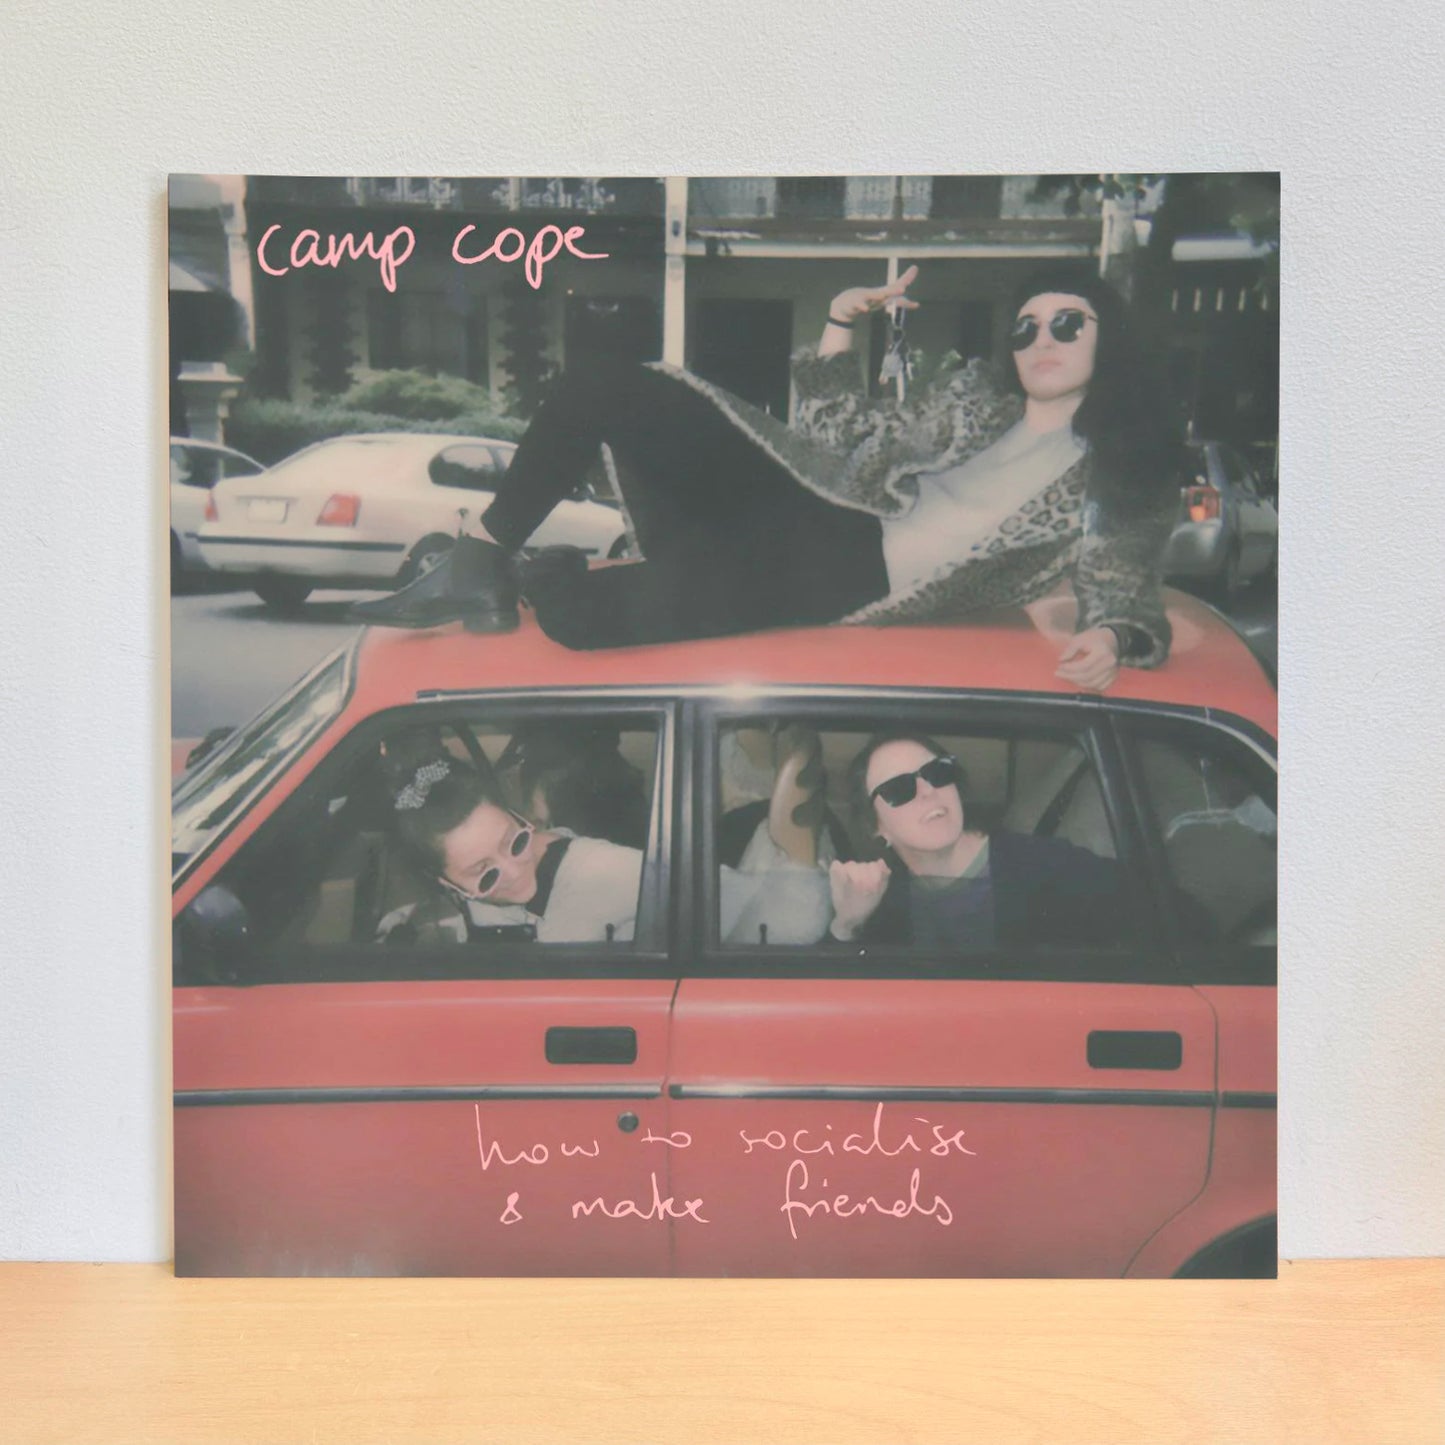 Camp Cope - How to Socialise & Make Friends. LP